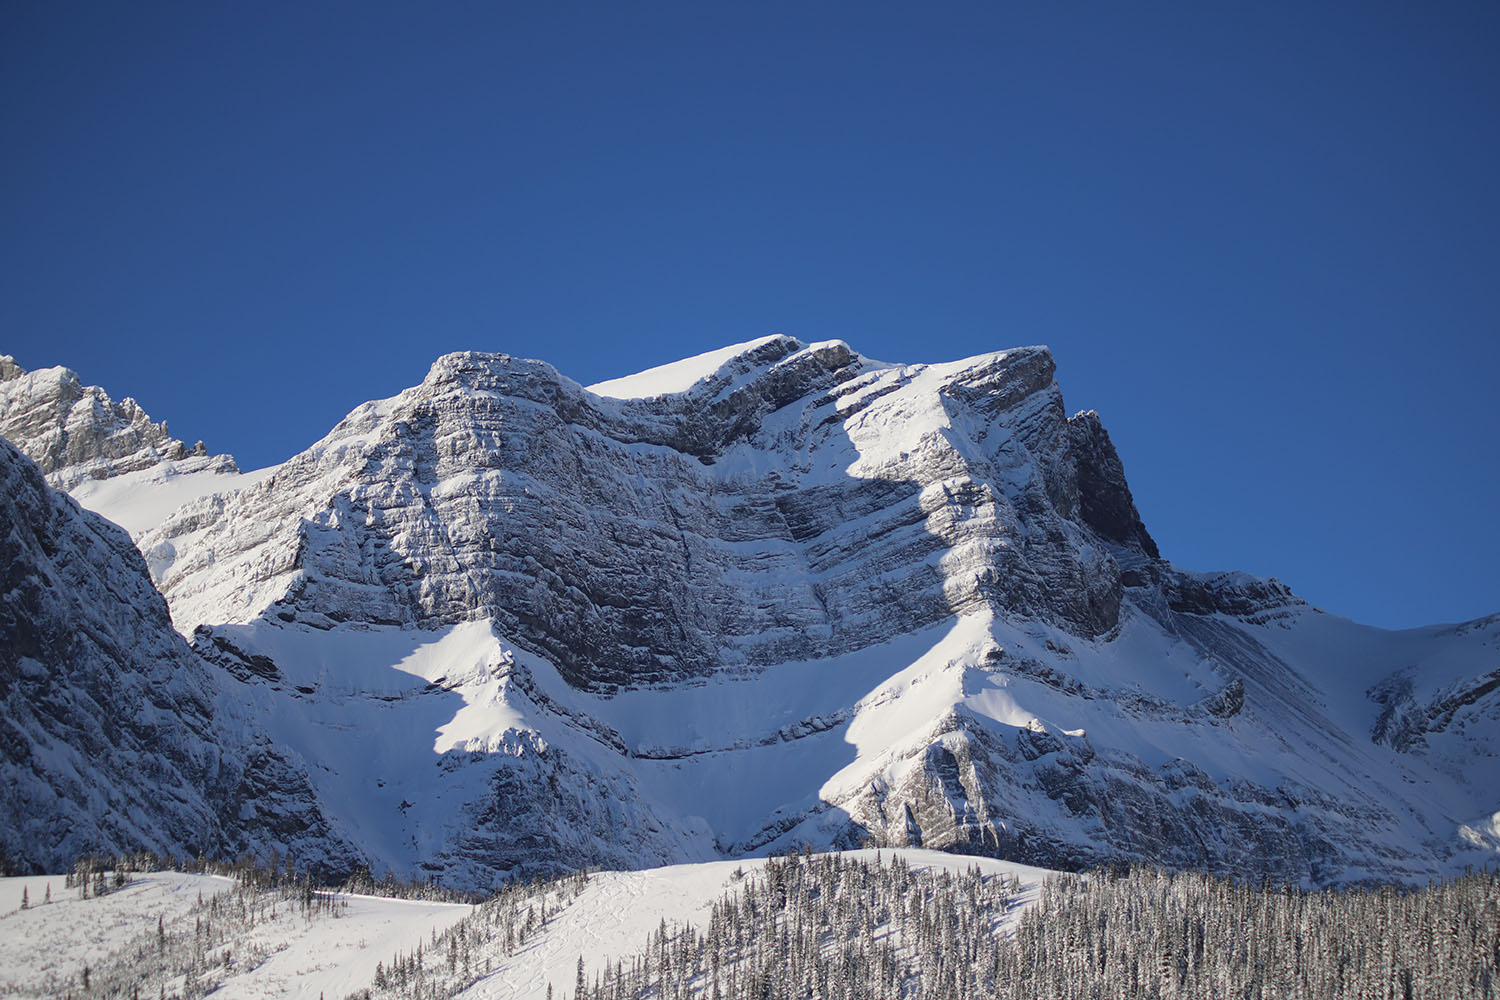 USask research site in Kananaskis Valley where snow is monitored. (Photo: Alistair Wallace)